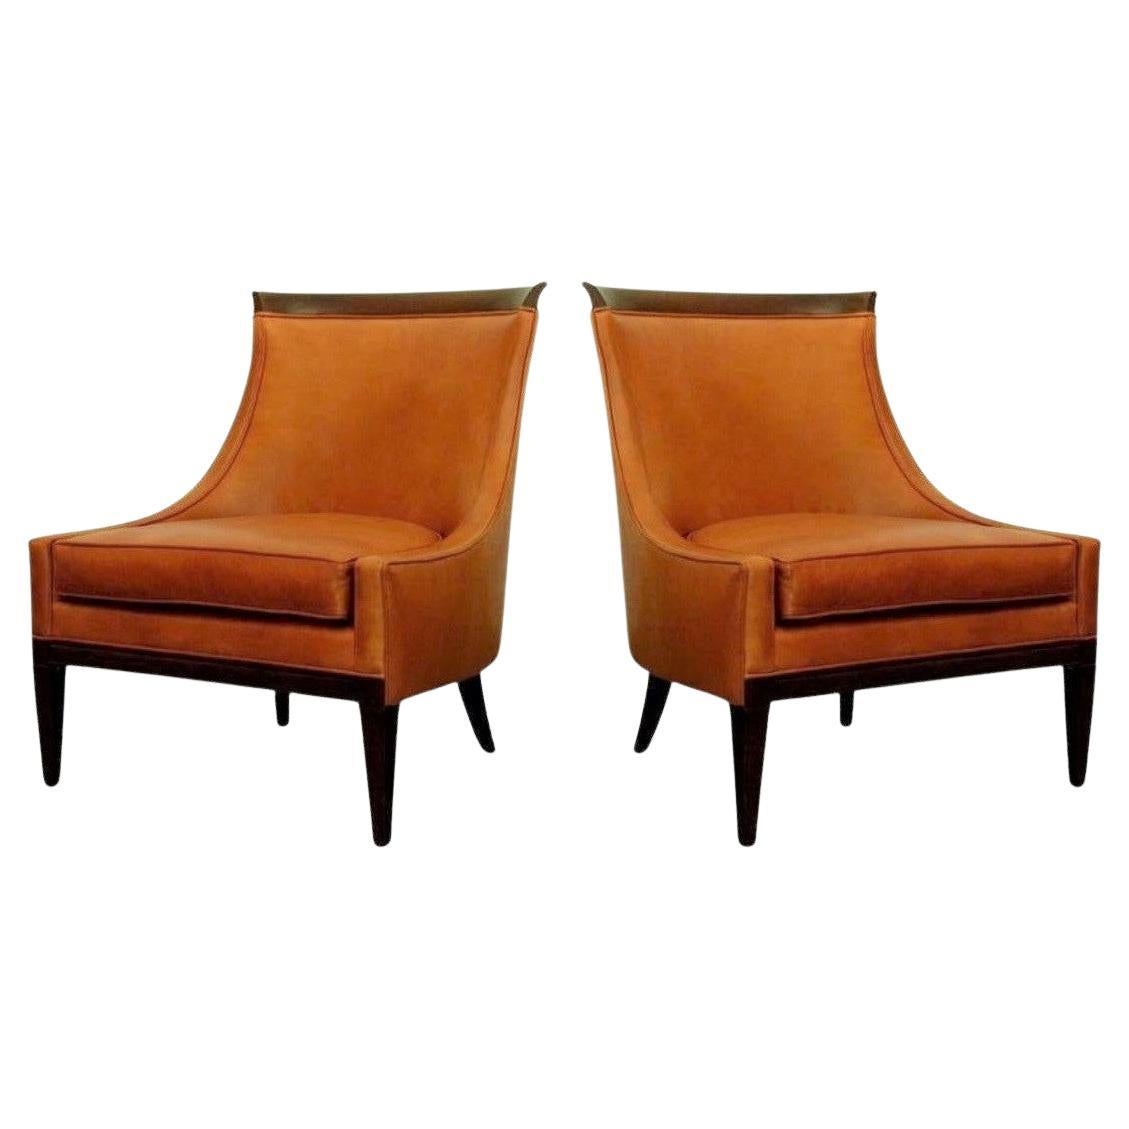 Pair Modernist High Back Leather Chairs